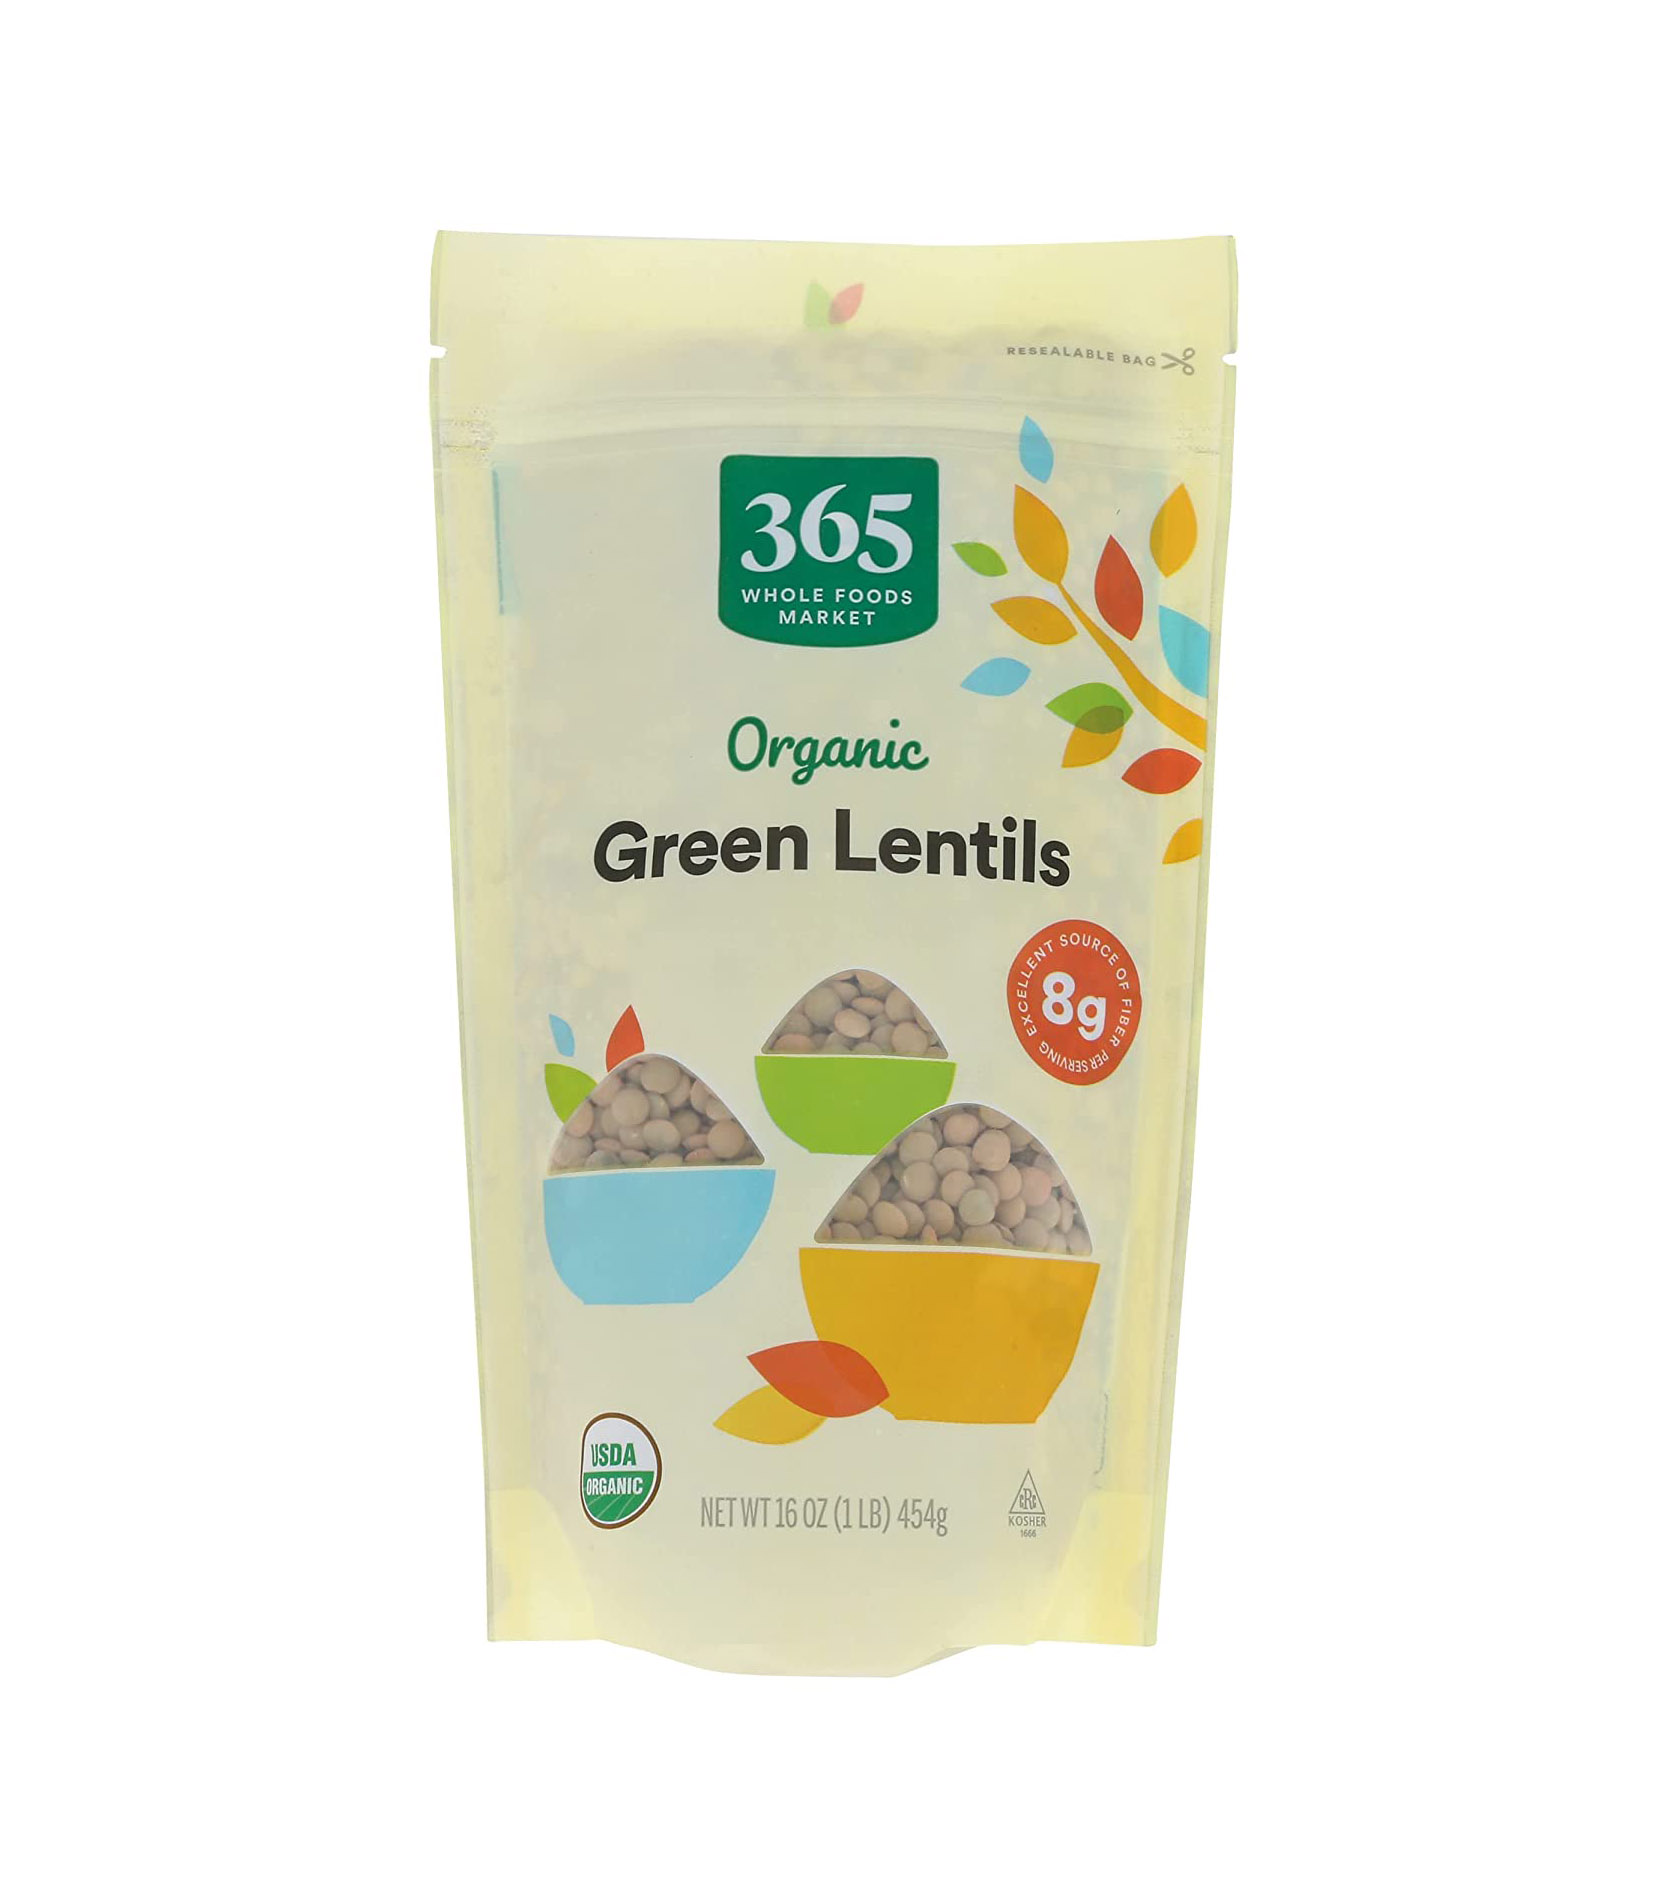 365 by Whole Foods Market + Organic Green Lentils